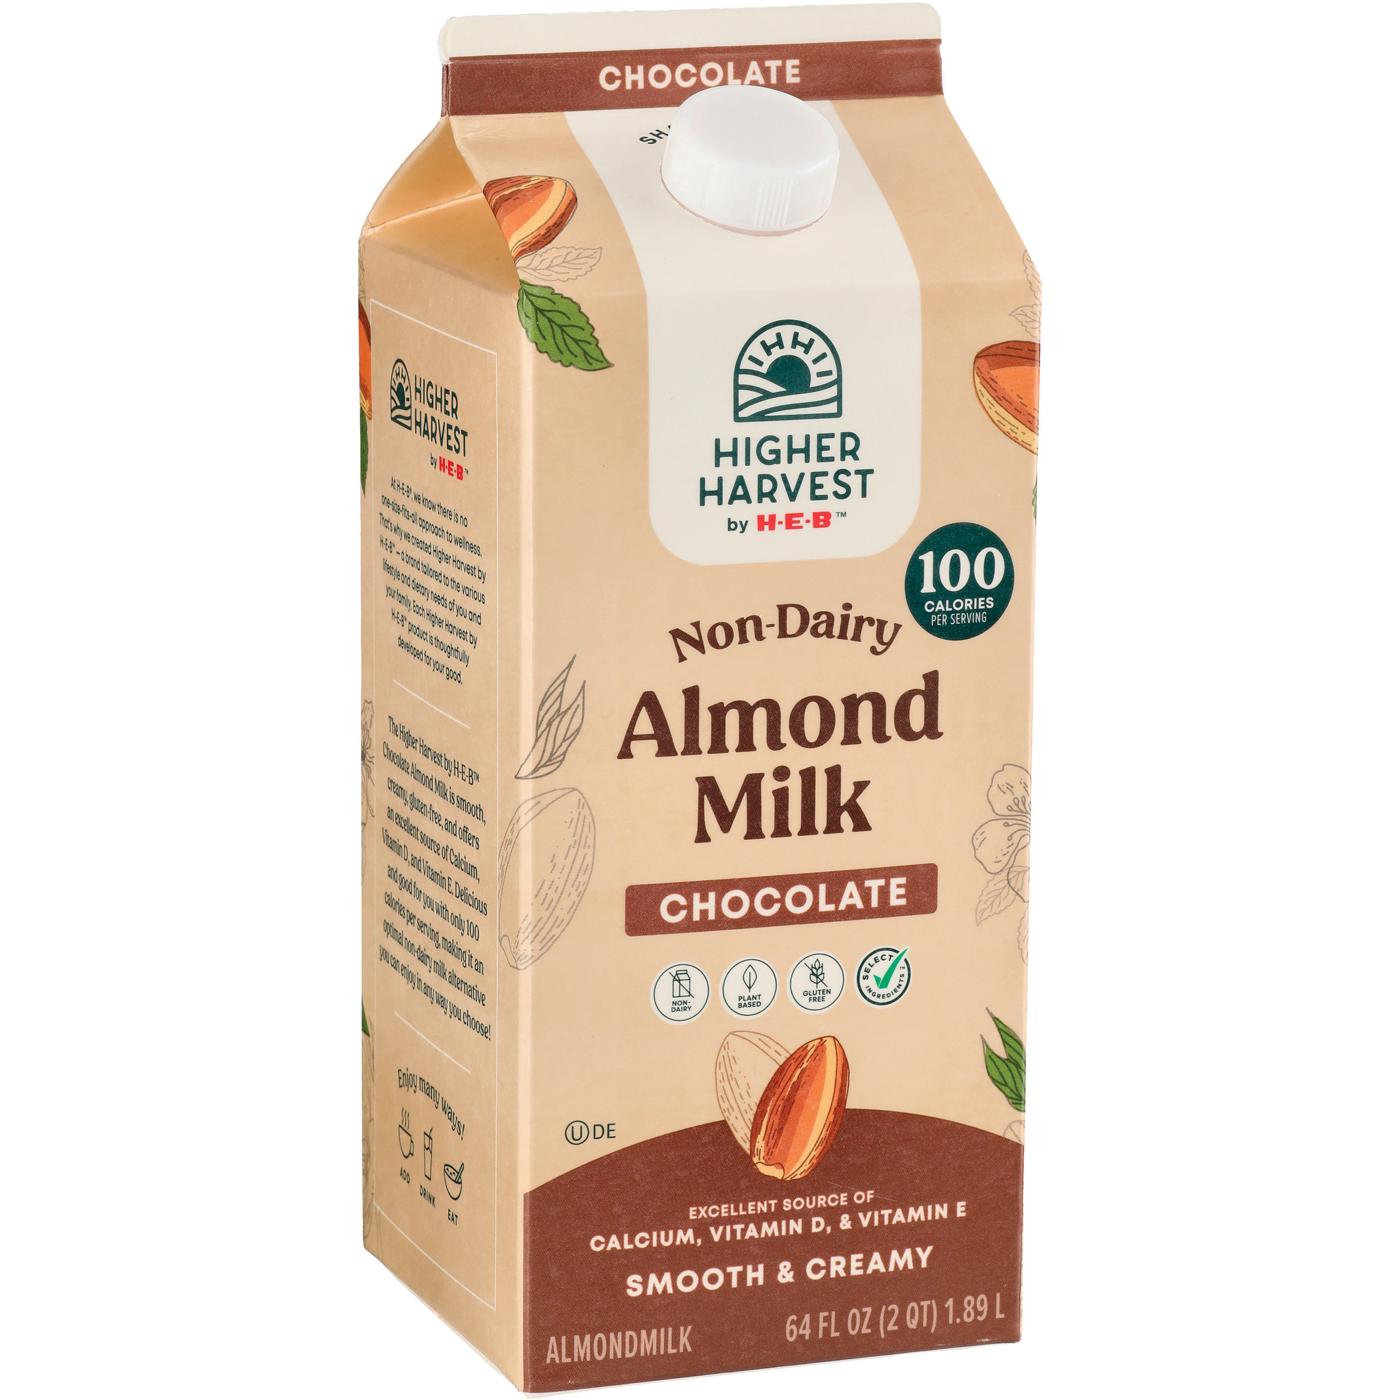 Higher Harvest by H-E-B Non-Dairy Almond Milk – Chocolate; image 2 of 2